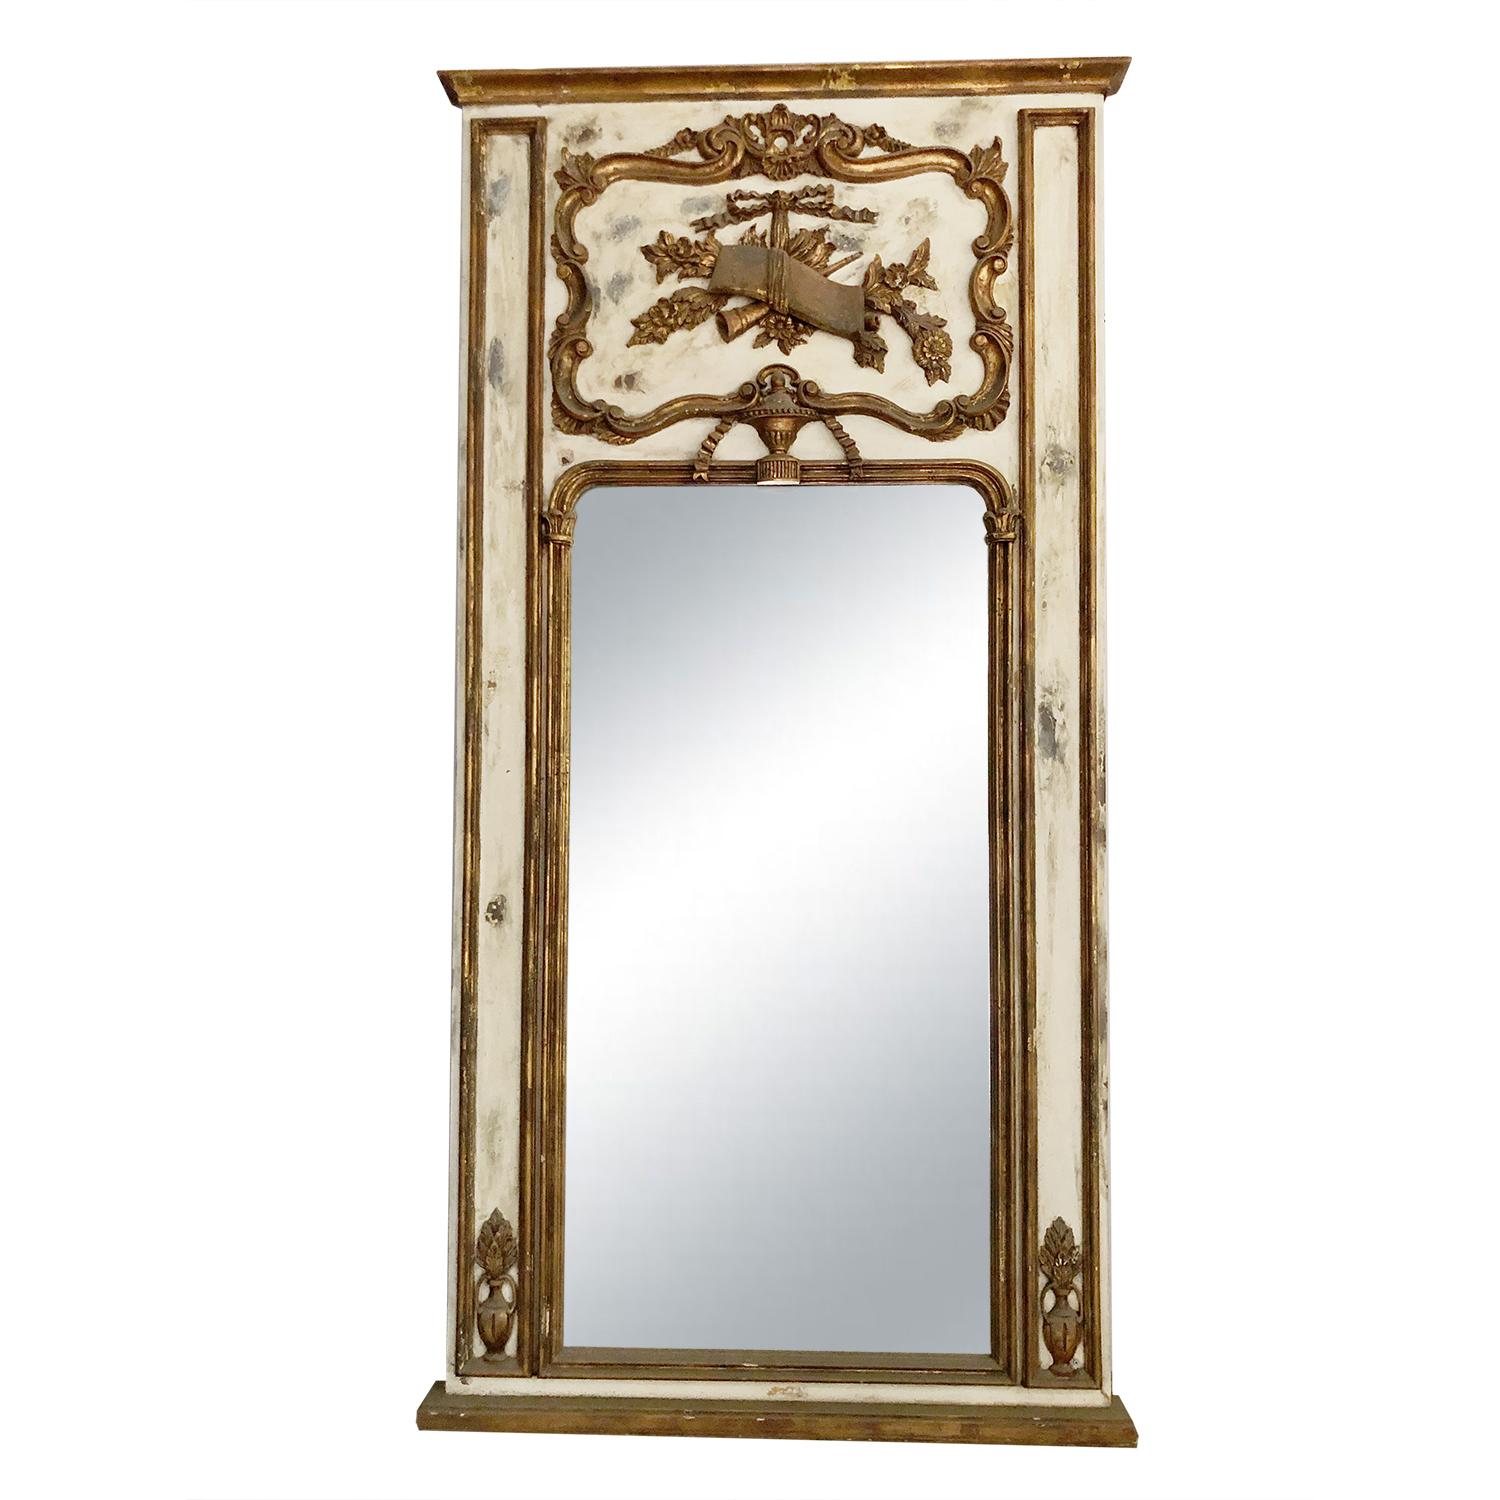 This 19th Century, antique Trumeau Louis XV style gilded Pinewood mirror has a white wash finish, enhanced by very detailed wood carvings, in good condition. The mirrored glass is original. Minor fading, due to age. Wear consistent with age and use.